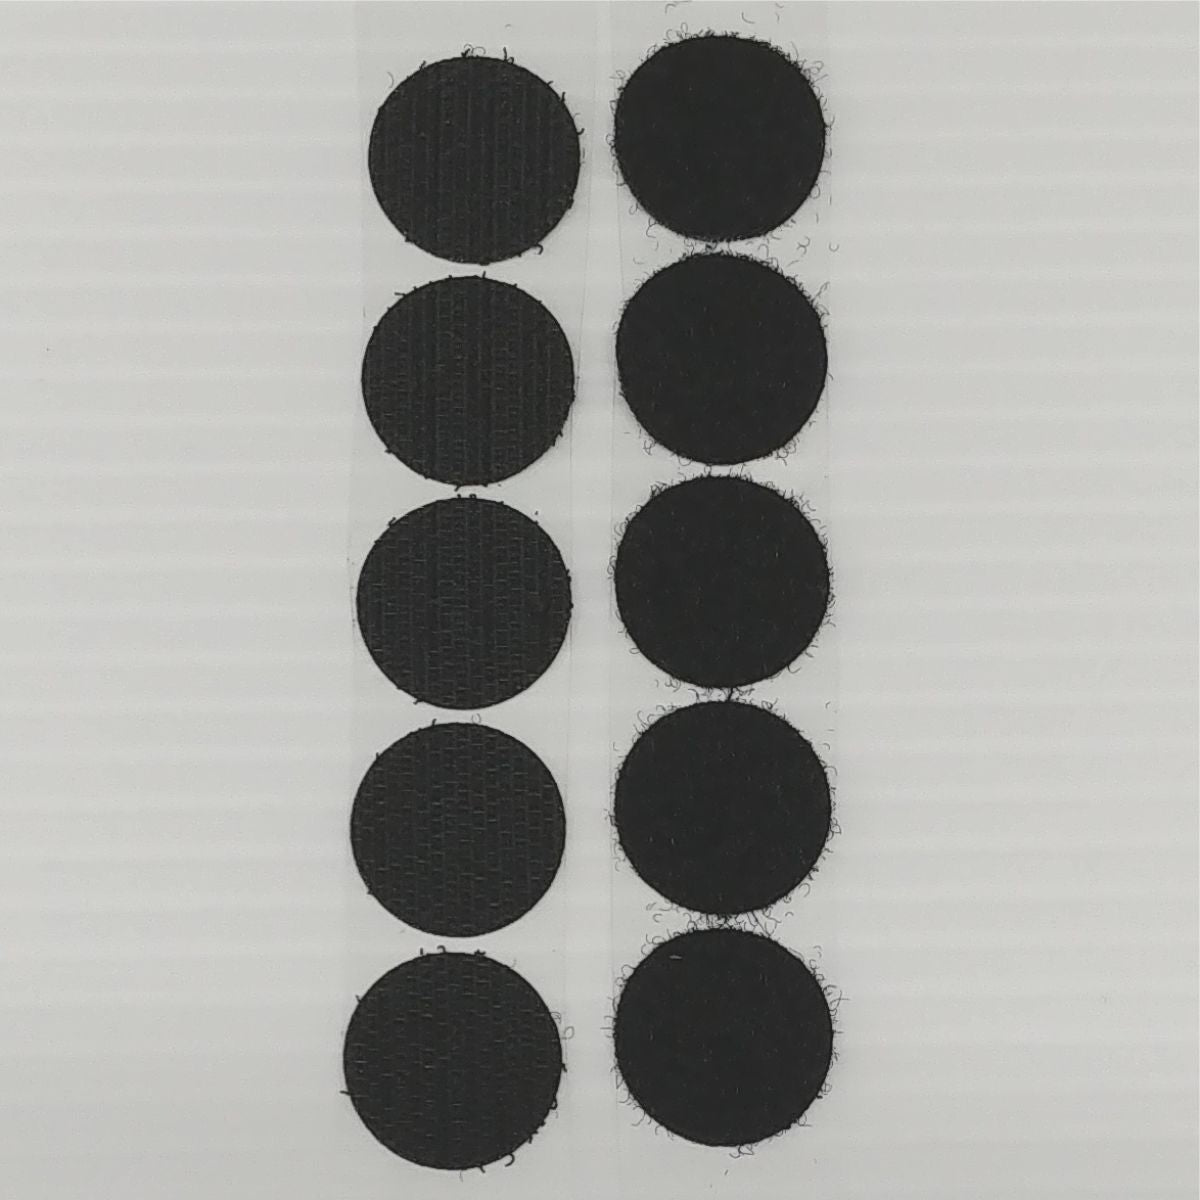 Self Adhesive Dots 5 Pack-Black SALE While Supplies Last